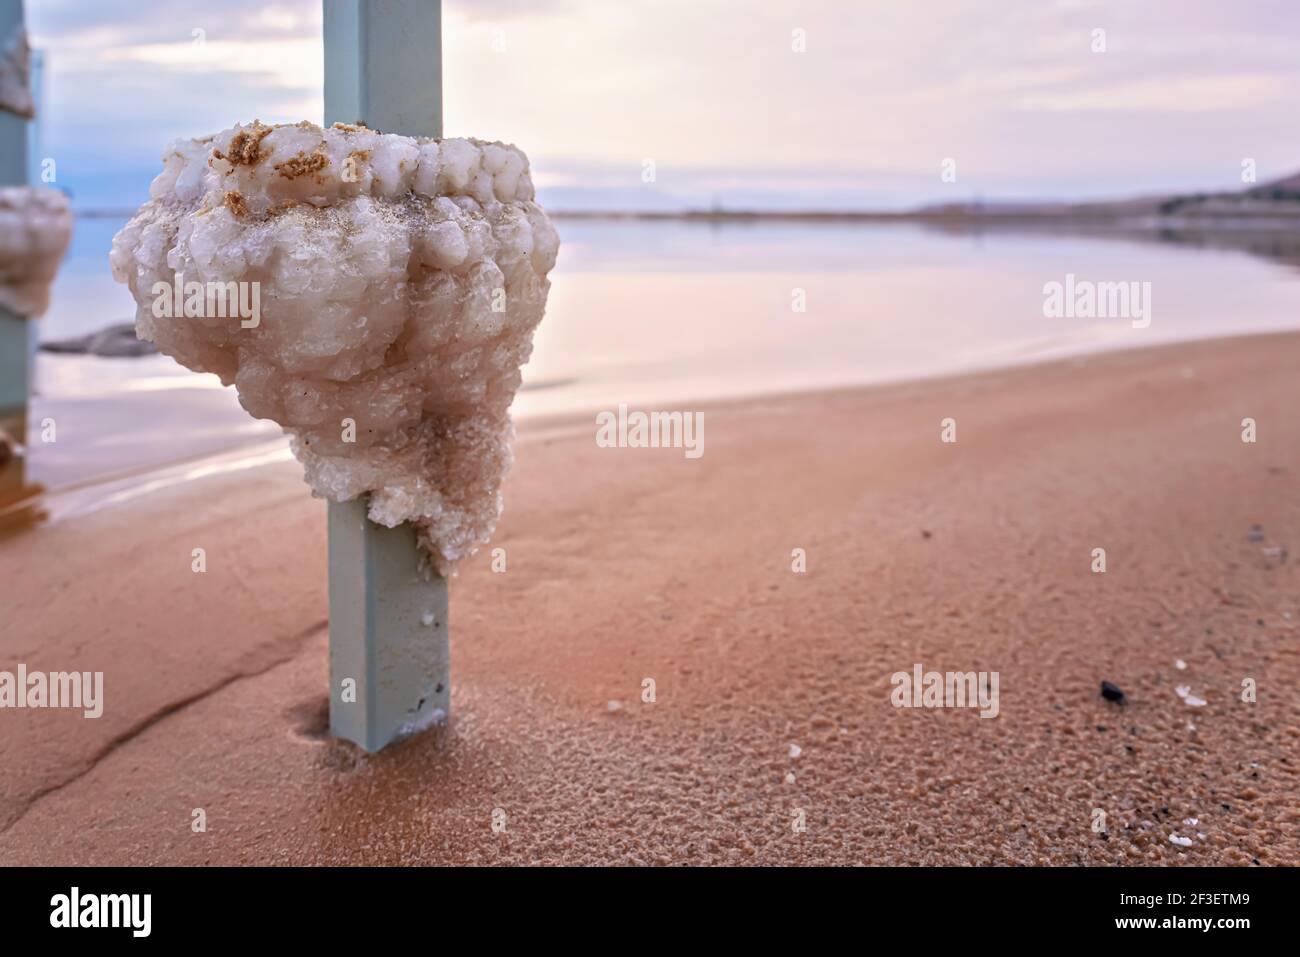 Salt crystals formed on steel bar at the Dead Sea shore, closeup detail, blurred beach and water background Stock Photo